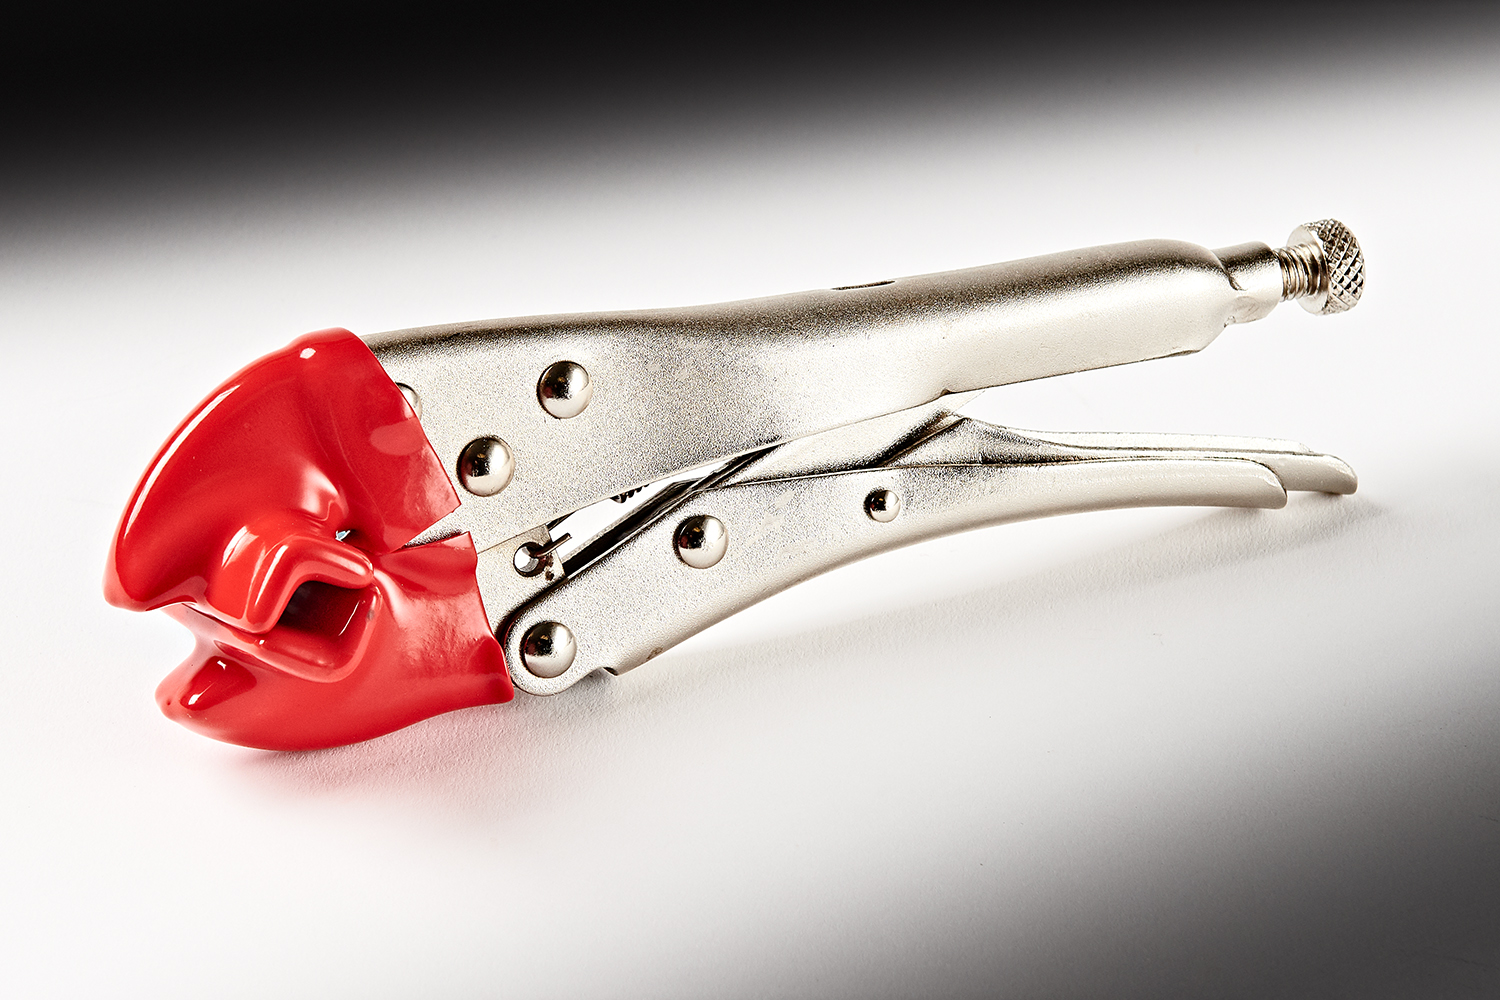 PSI Locking Soft-Grip Pliers for Pen Disassembly